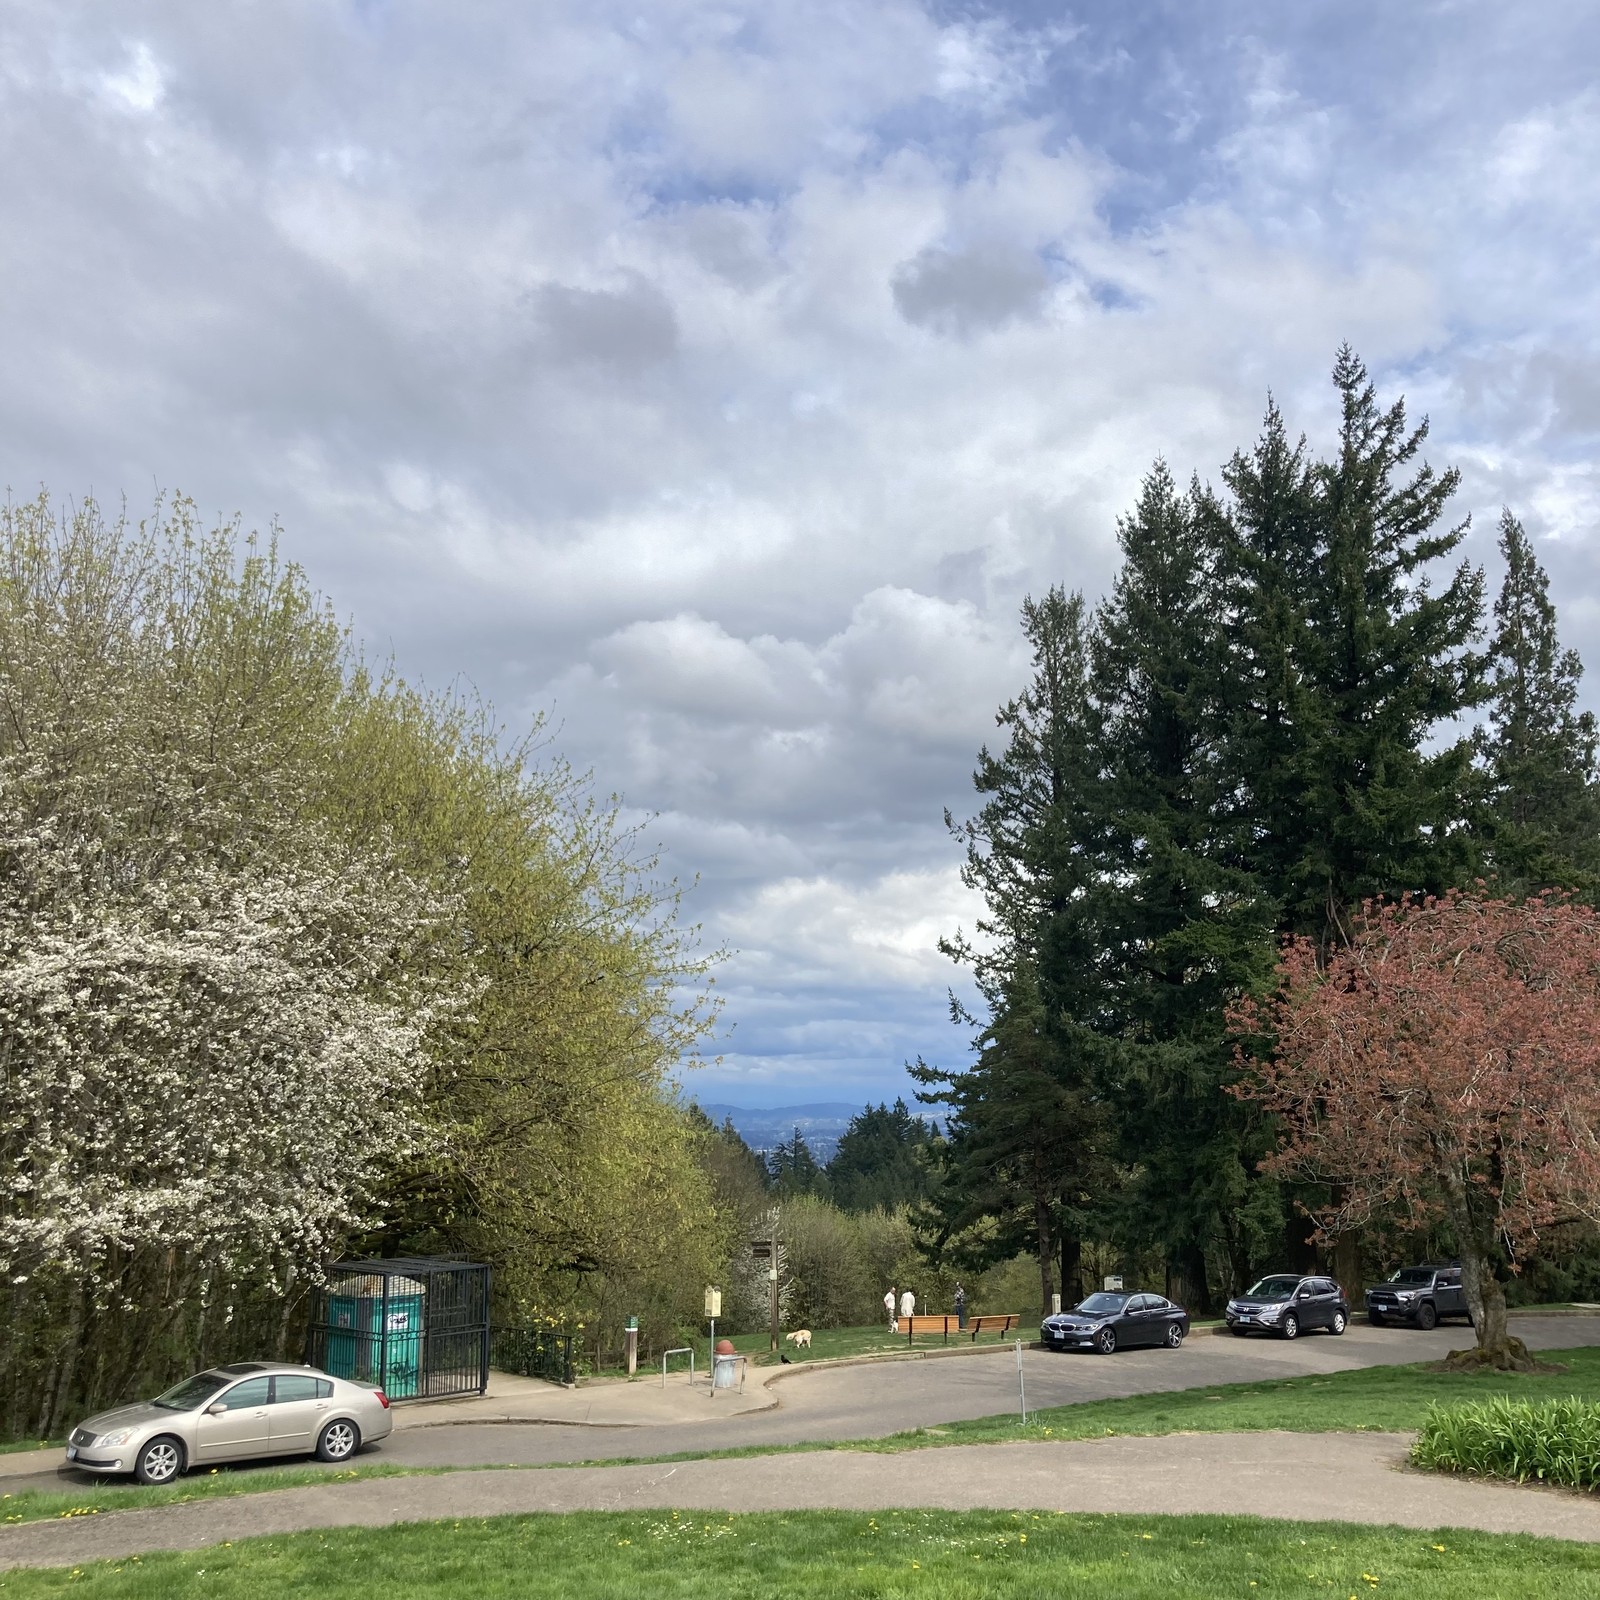 View from Council Crest Park toward Mt. Hood, which behind a colorful sky full of clouds scudding from the southwest. Two trees in the foreground are in full bloom. About 100' downslope a dog and a crow stand near a sign; three people stand nearby talking